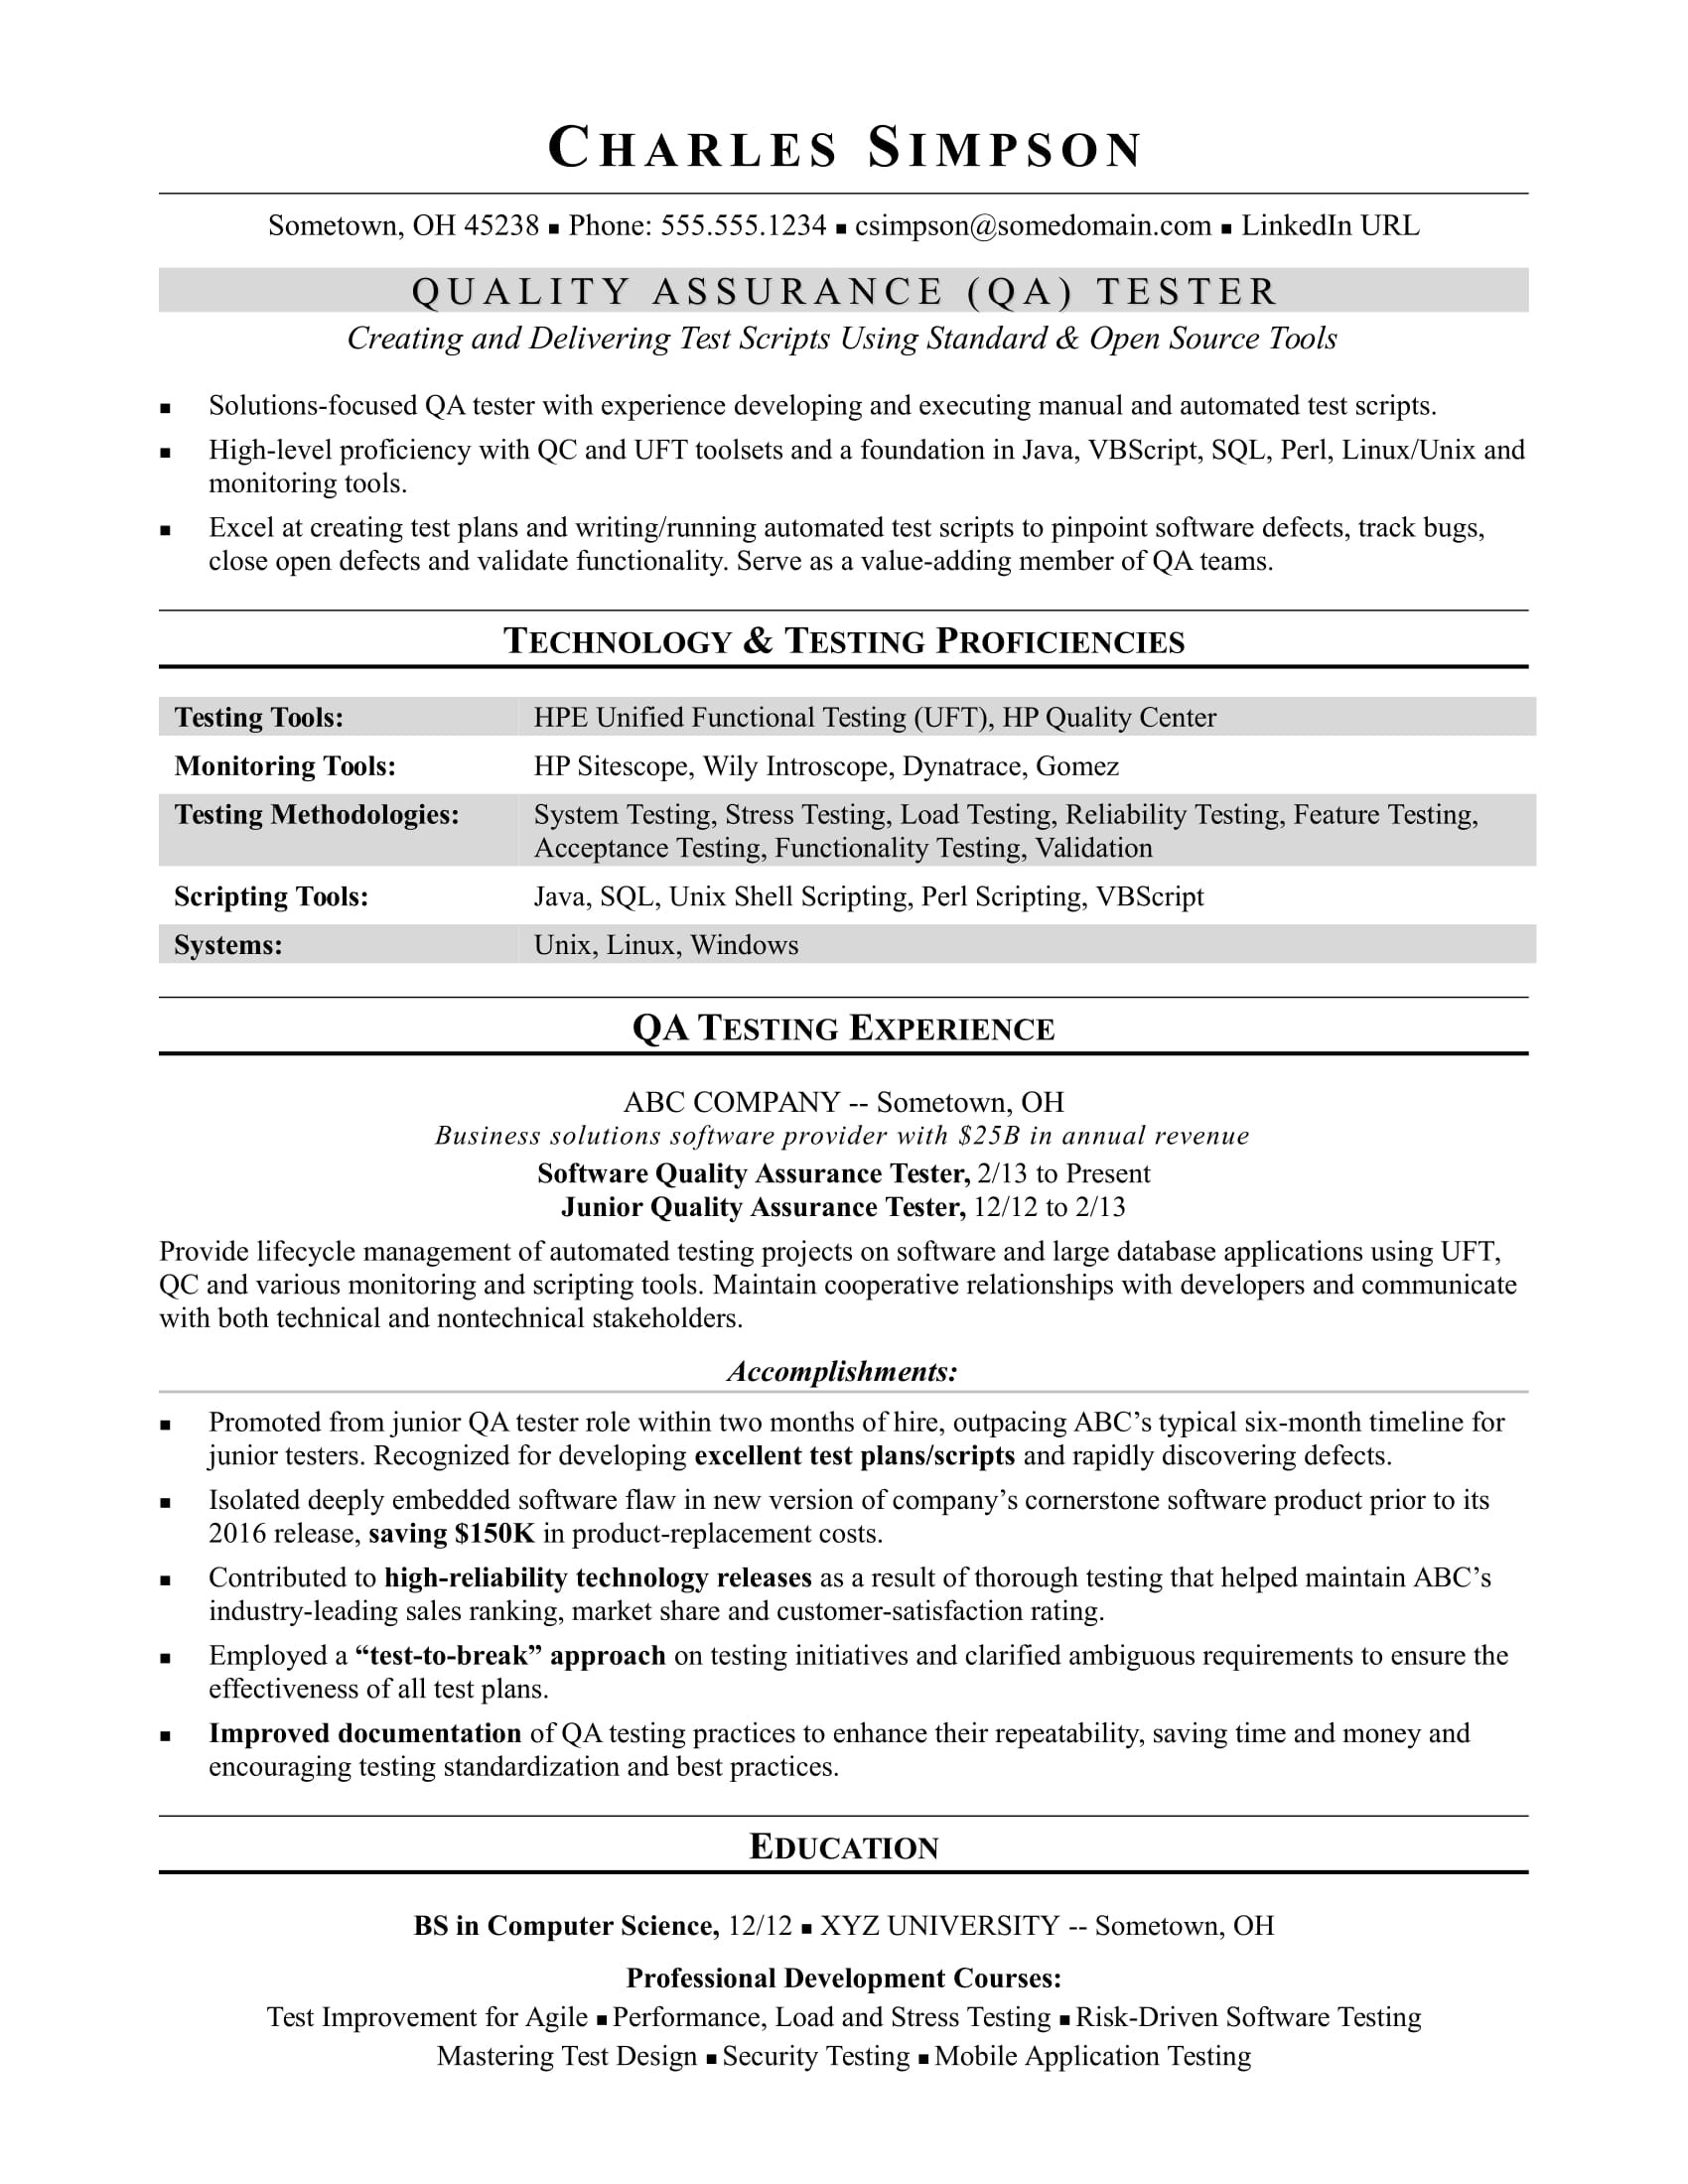 Software Testing Sample Resume with Latest tools Sample Resume for A Midlevel Qa software Tester Monster.com